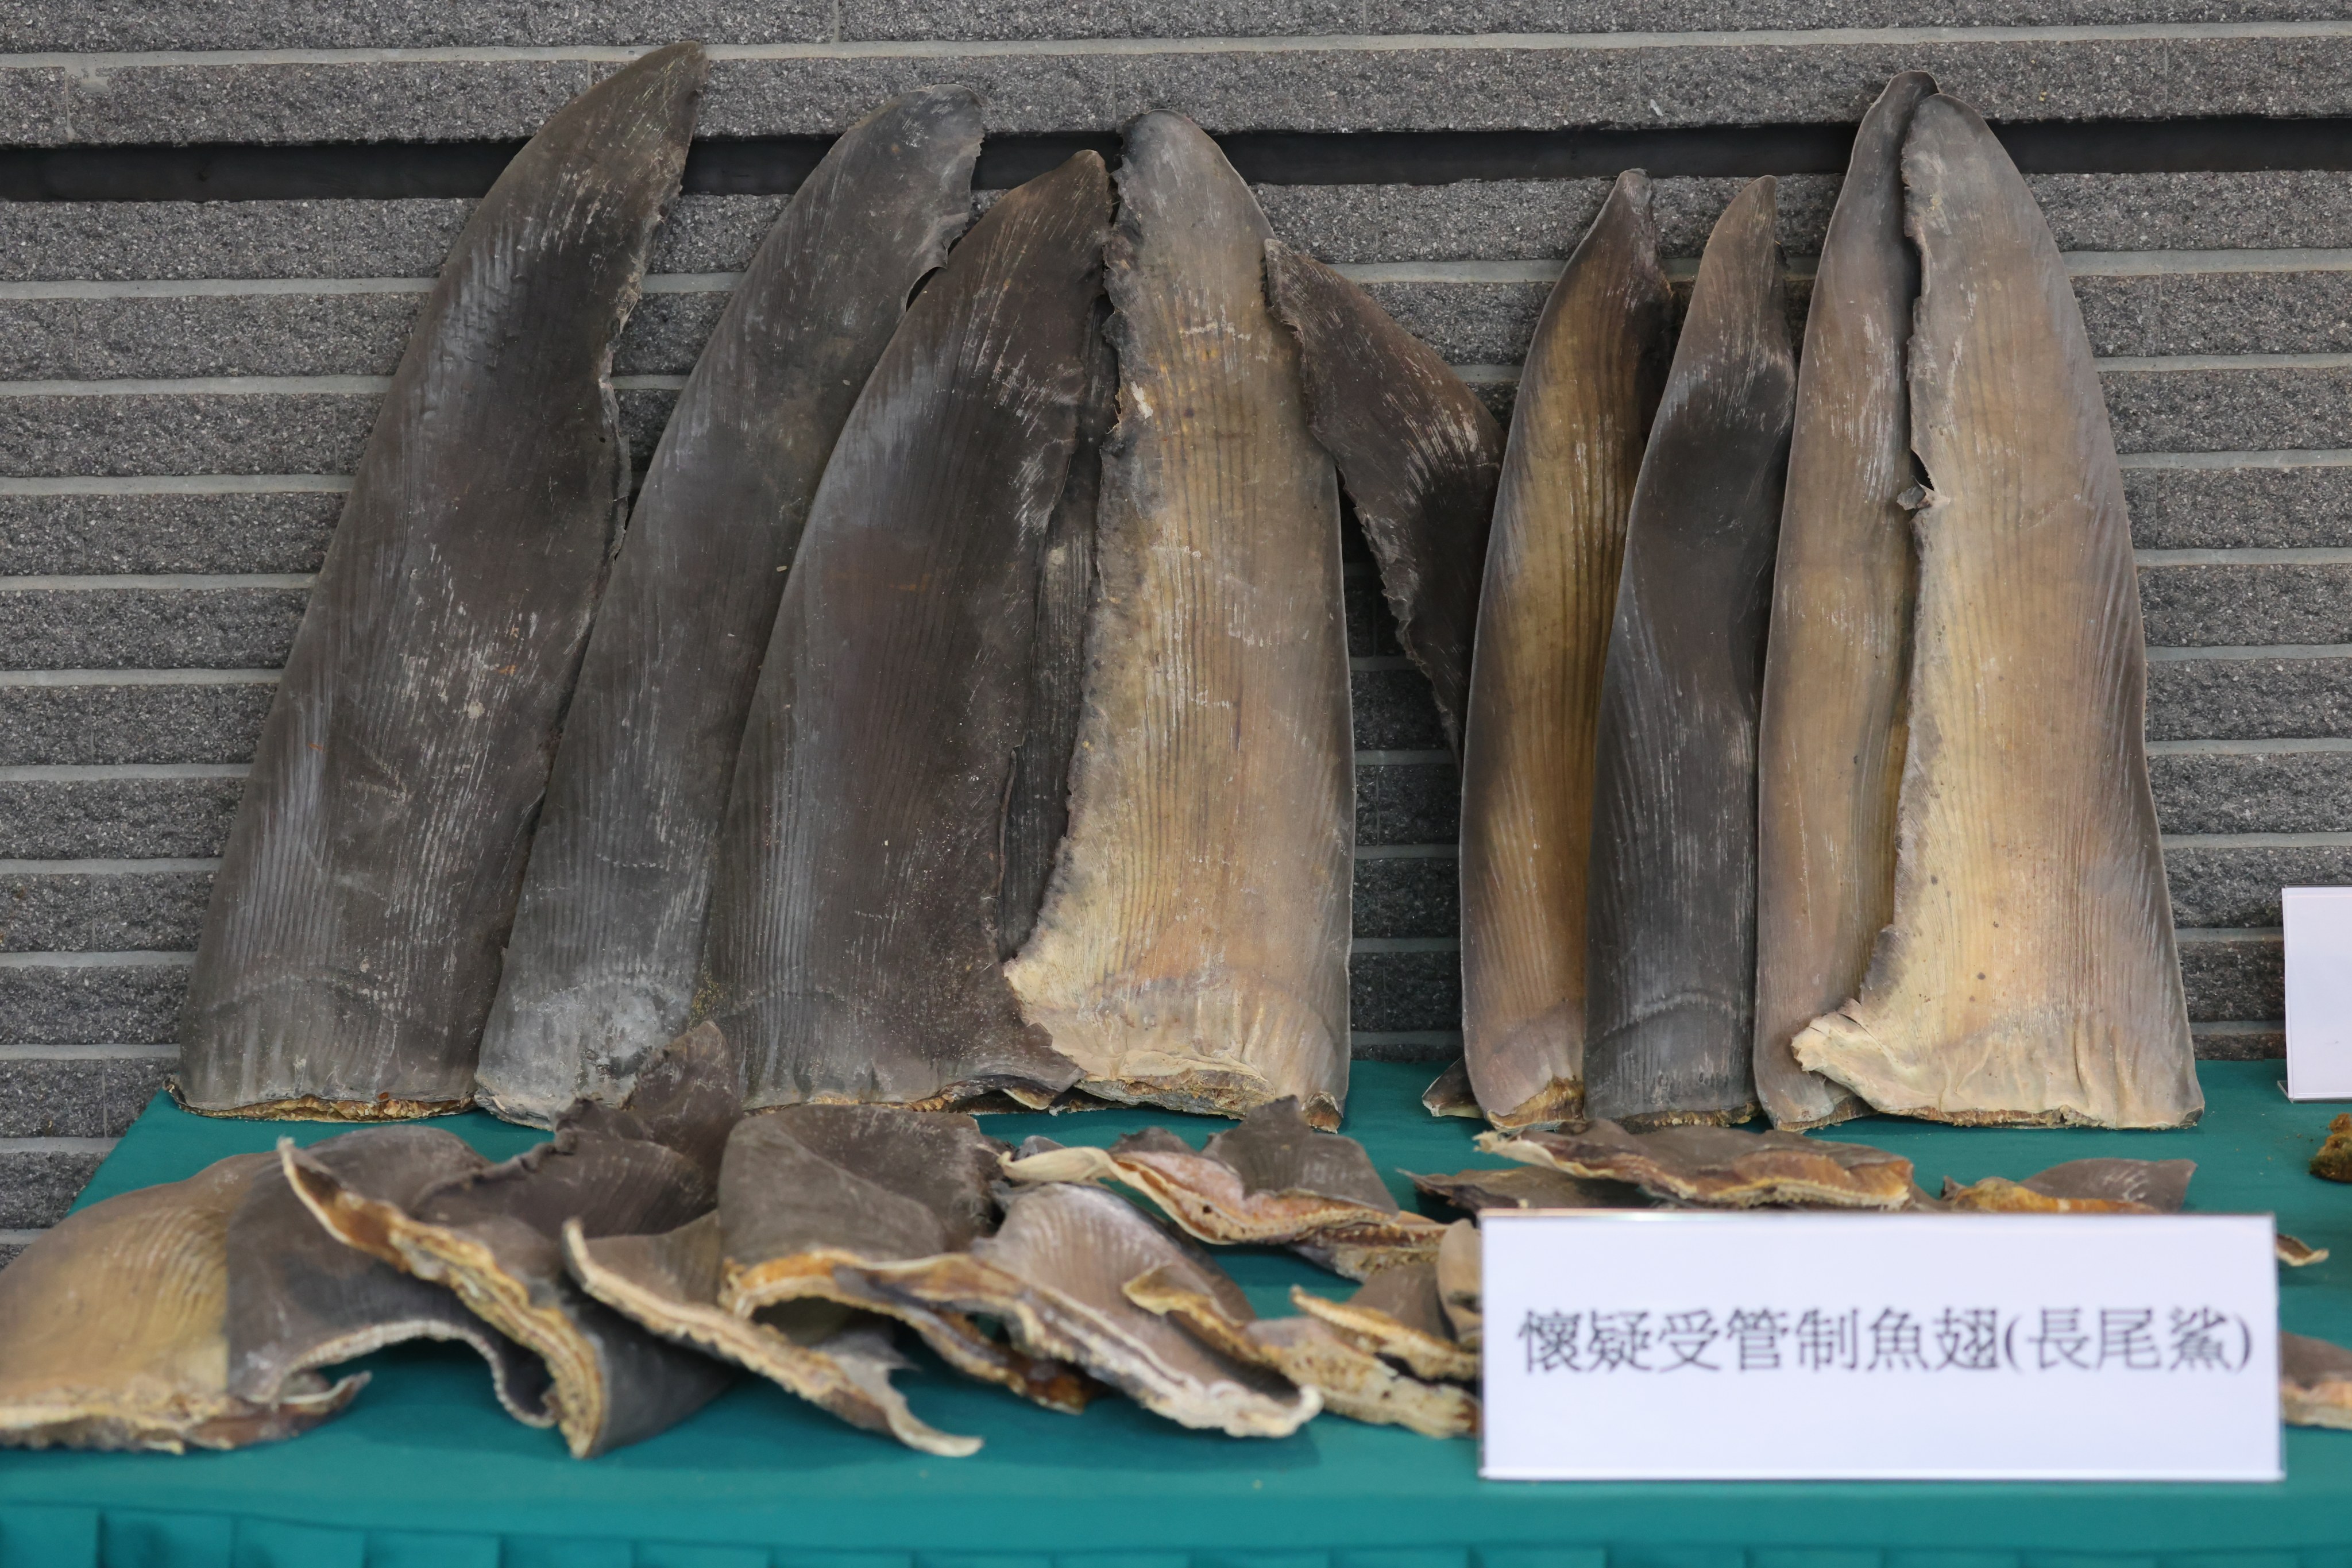 Confiscated shark fins seen at Tsing Yi Customs Station on October 7, 2021. Authorities in Hong Kong are cracking down on illegal shark fin trading but demand for fin products in countries like China and Vietnam means trafficking remains a lucrative business. Photo: Dickson Lee